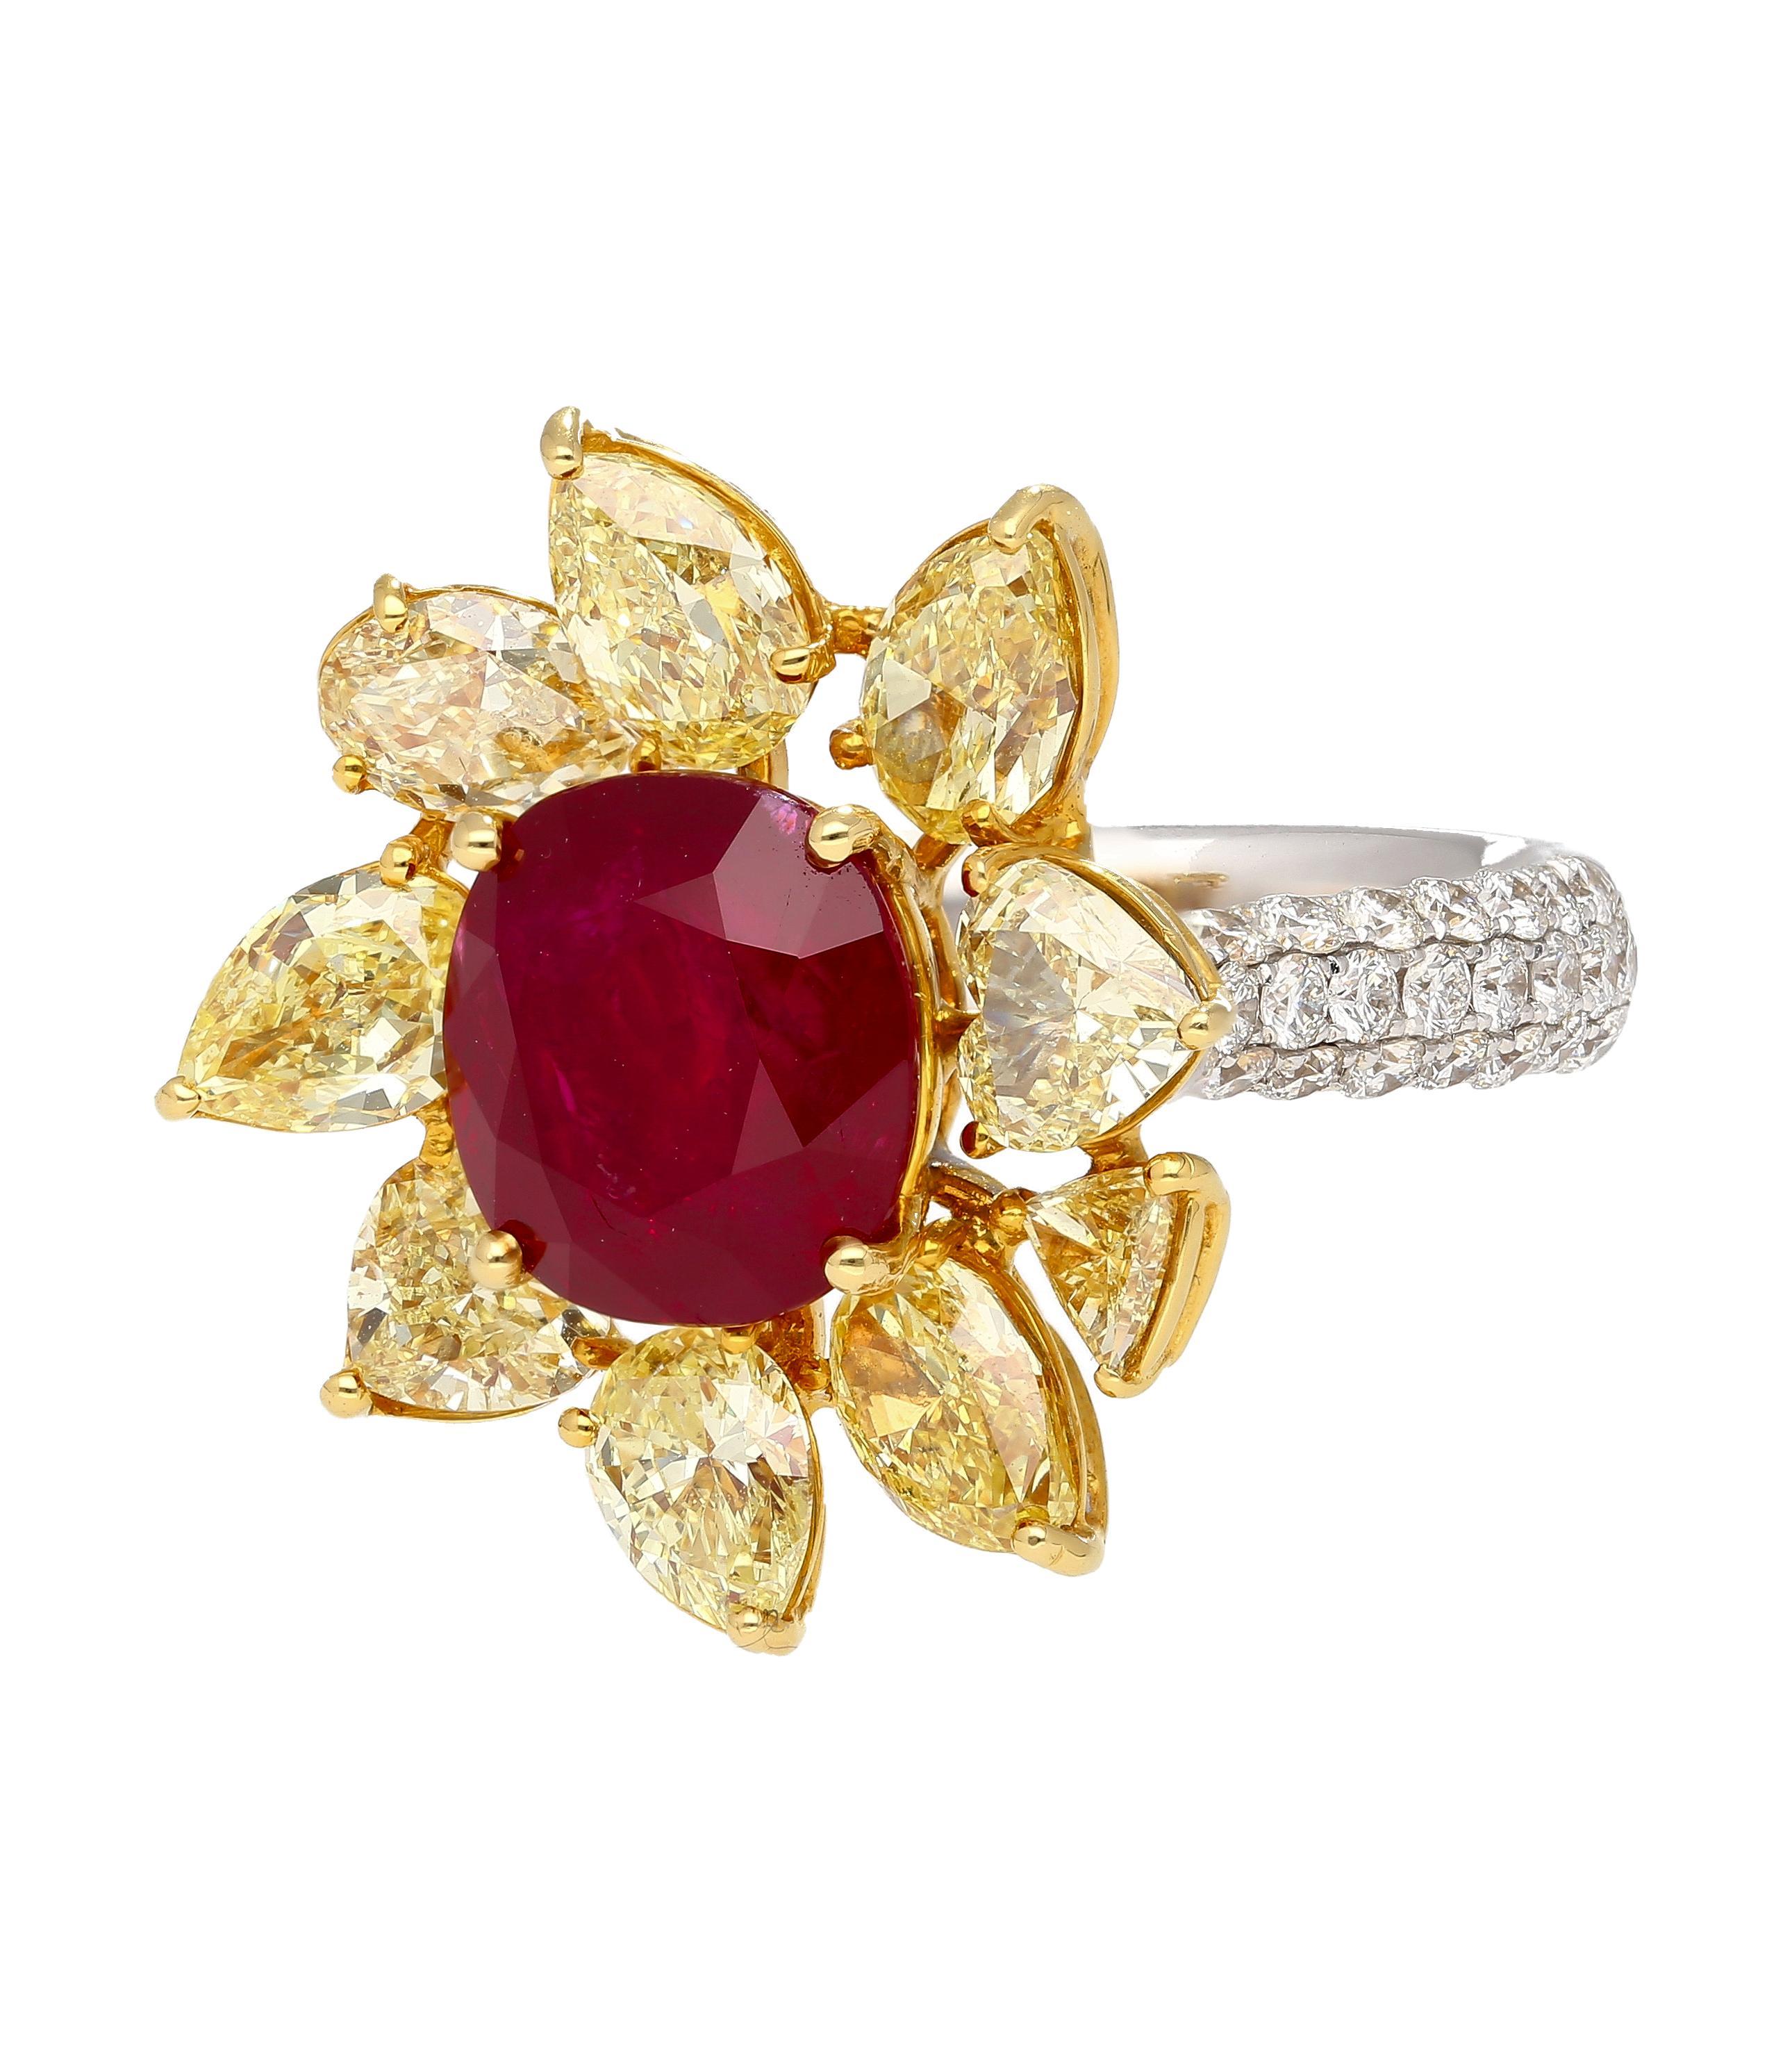 Jewelry Details:
Item Type: Ruby Ring
Metal Type: 18K White and Yellow Gold
Weight: 12.25 grams
Size: 6
Center Stone Details:
Gemstone Type: Burma Ruby
Carat: 5.46 Carats
Color: Red
Origin: Burma (Myanmar)
Treatment: No Heat
Certification: AGL